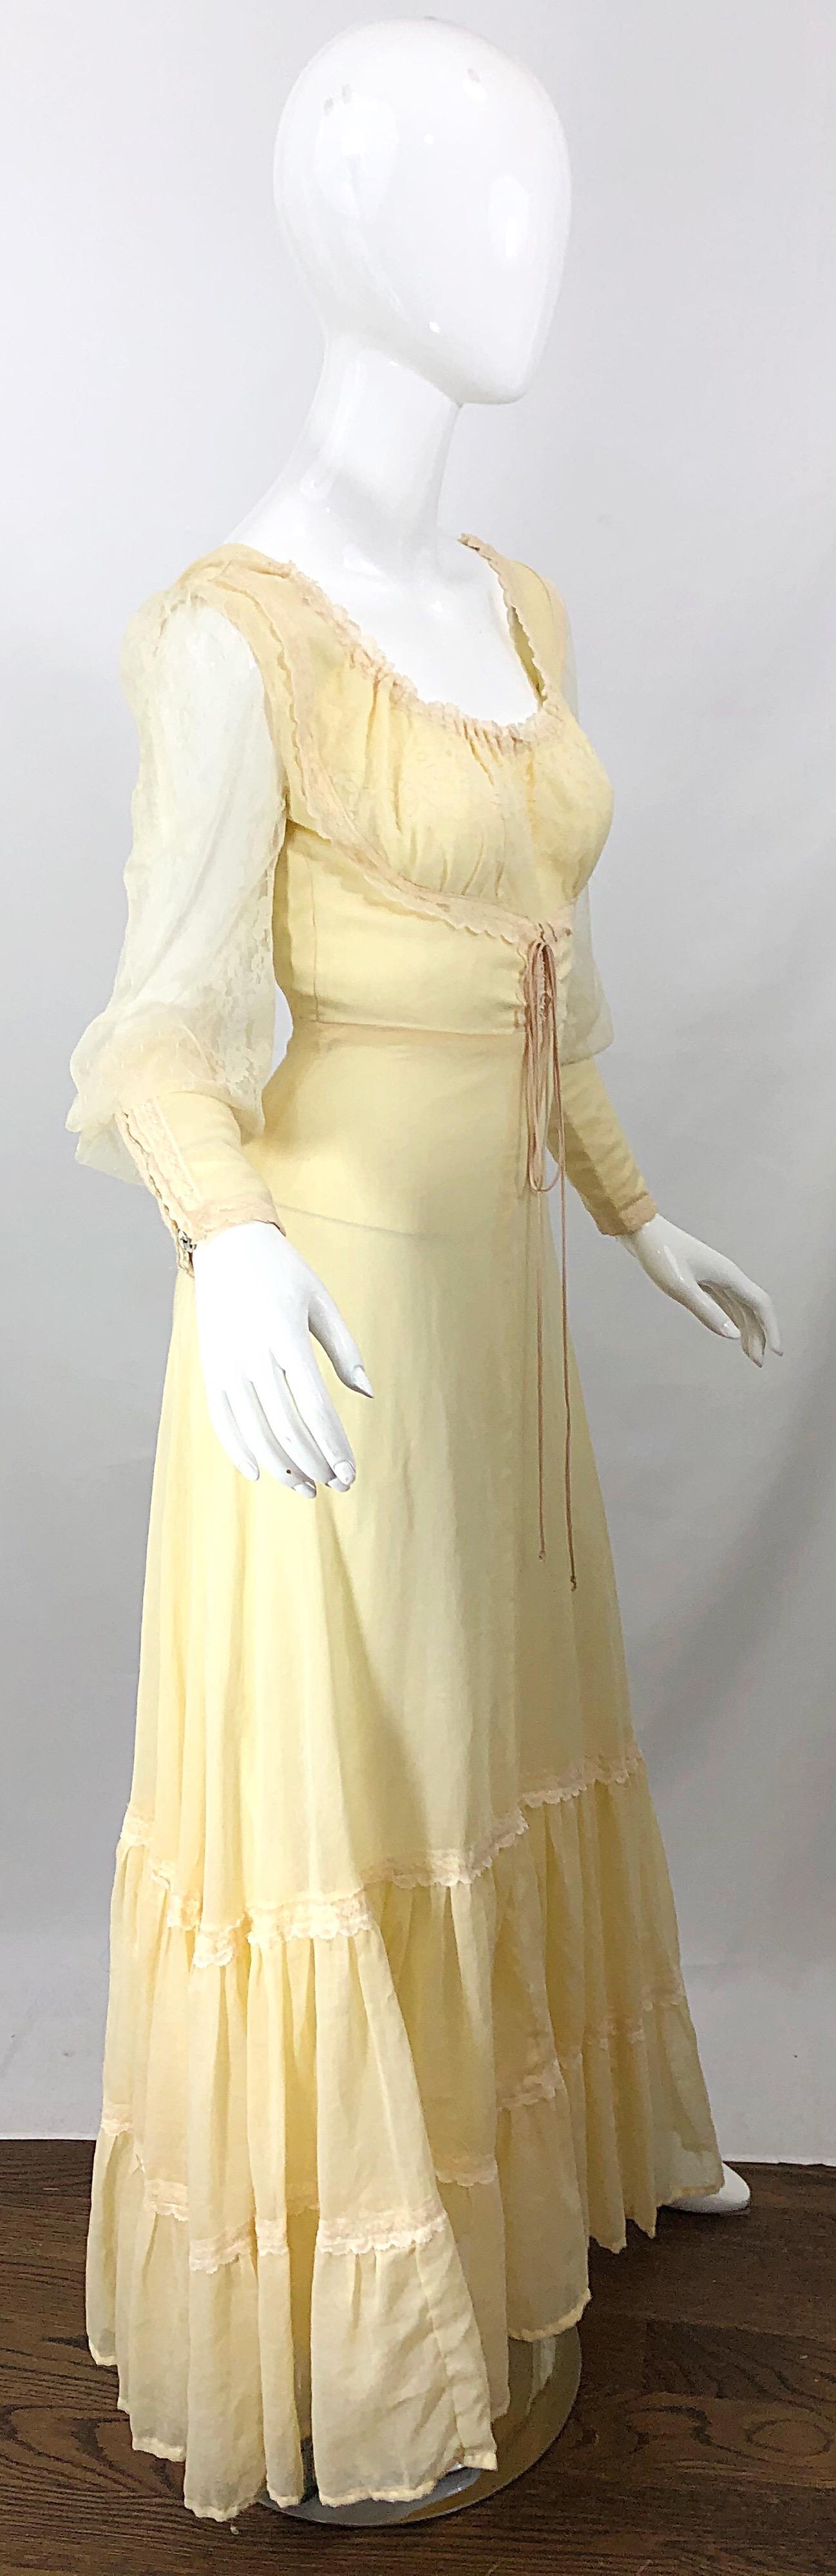 1970s Victorian Inspired Pale Yellow Cotton Voile + Lace Peasant 70s Maxi Dress For Sale 2